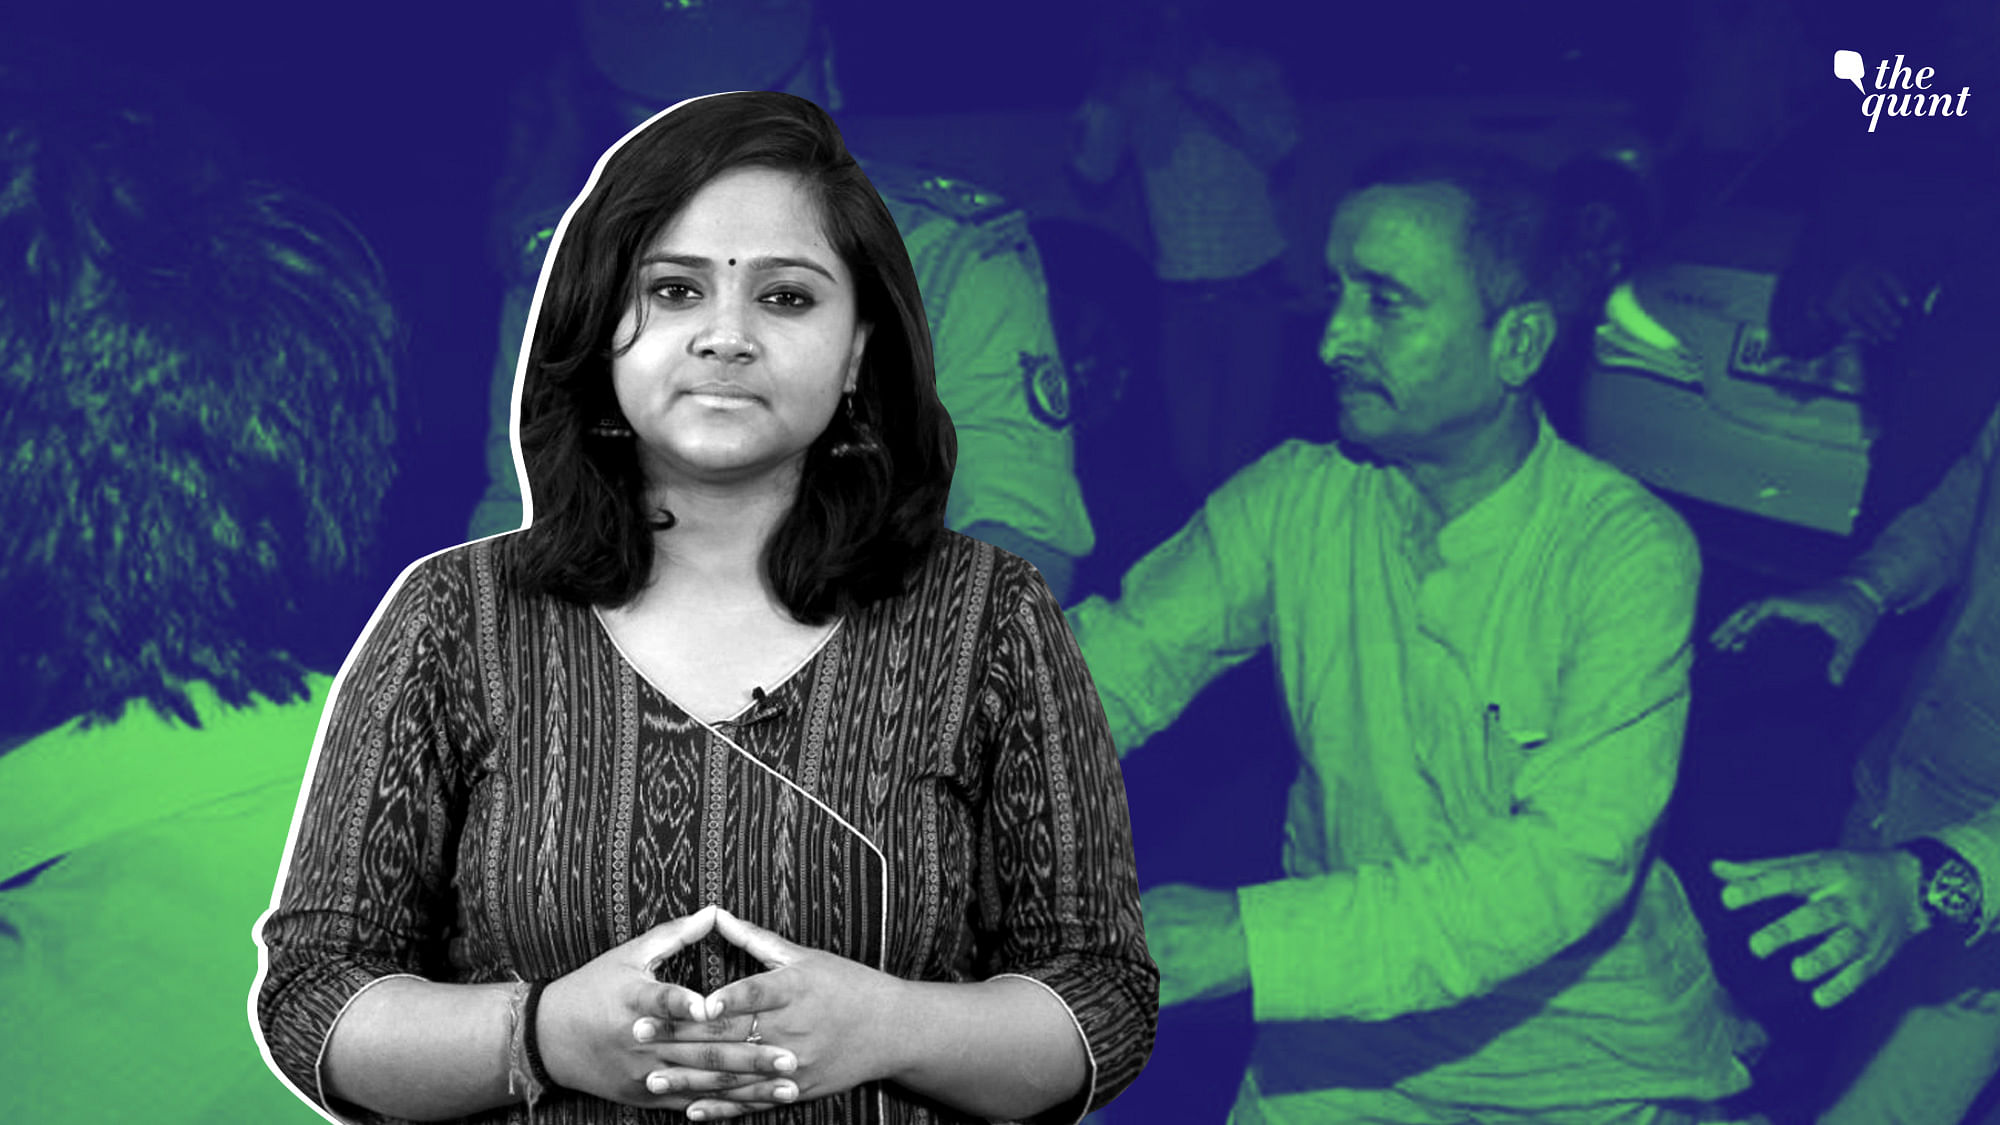 Here is how the events in the Unnao rape case unfolded since June 2017.